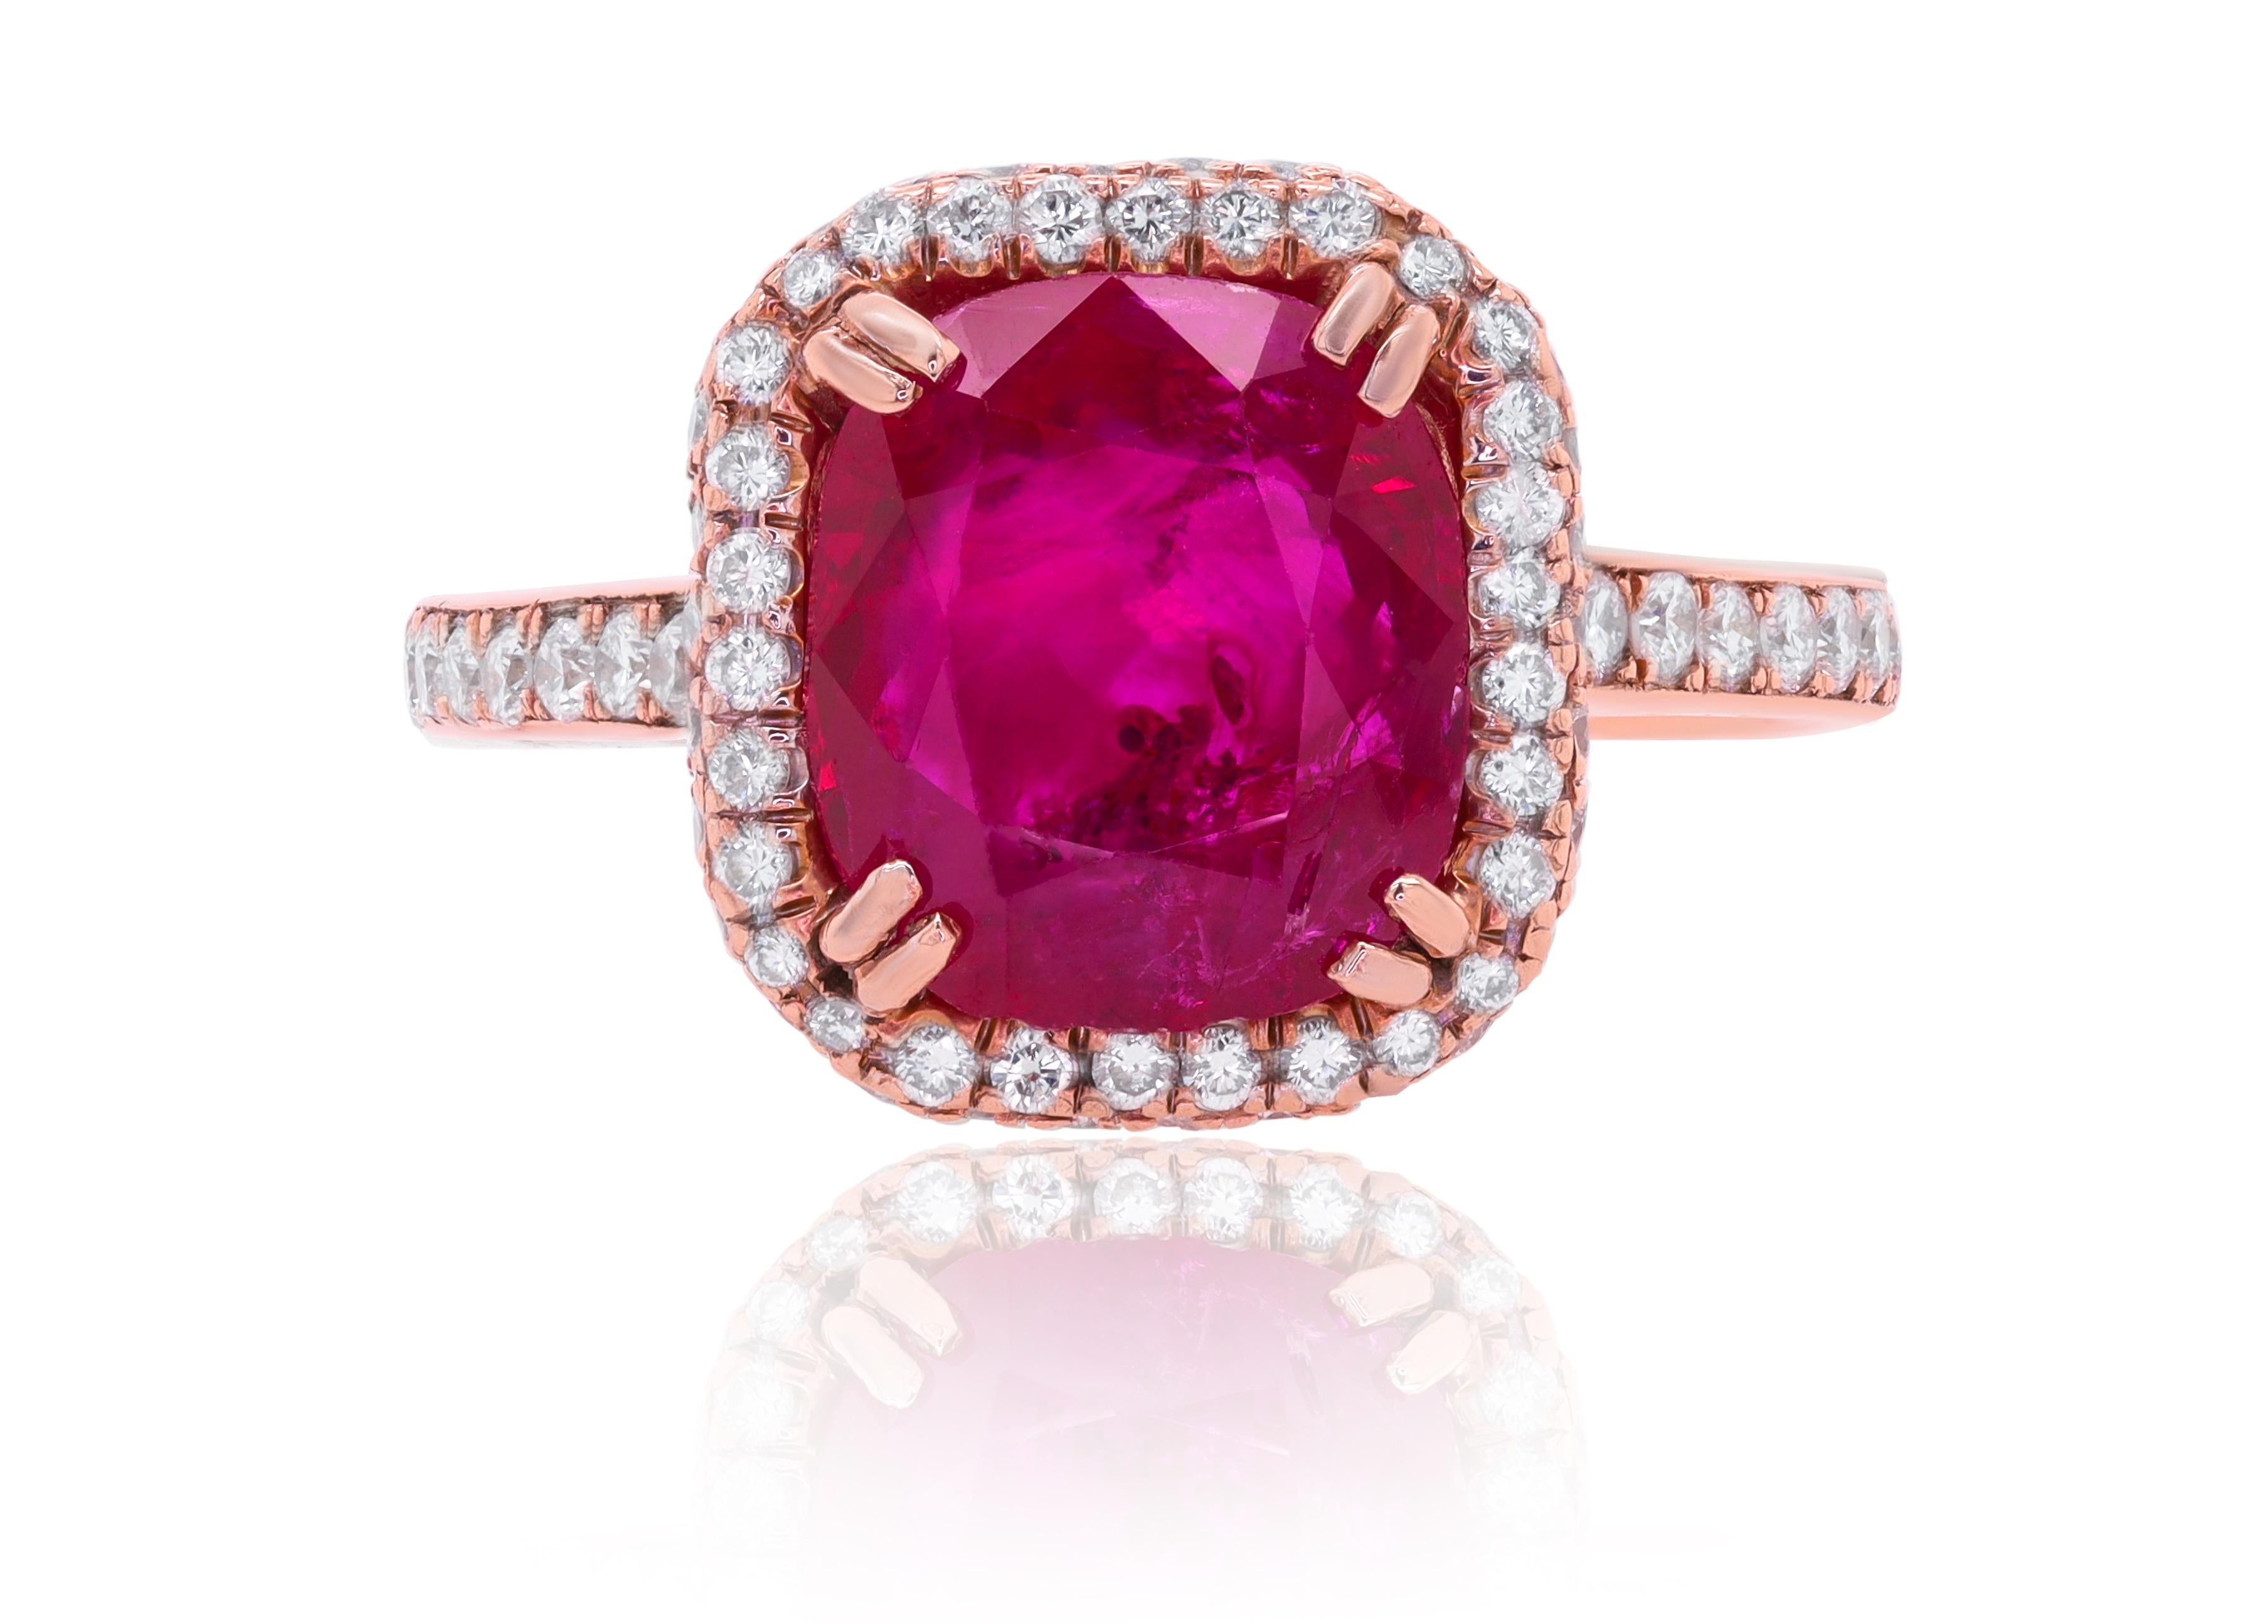 14 kt rose gold ruby and diamond ring featuring a 3.14 ct center ruby surrounded by micropave diamonds totaling 1.30 cts (C.Dunaigre Certified).
Diana M. is a leading supplier of top-quality fine jewelry for over 35 years.
Diana M is one-stop shop